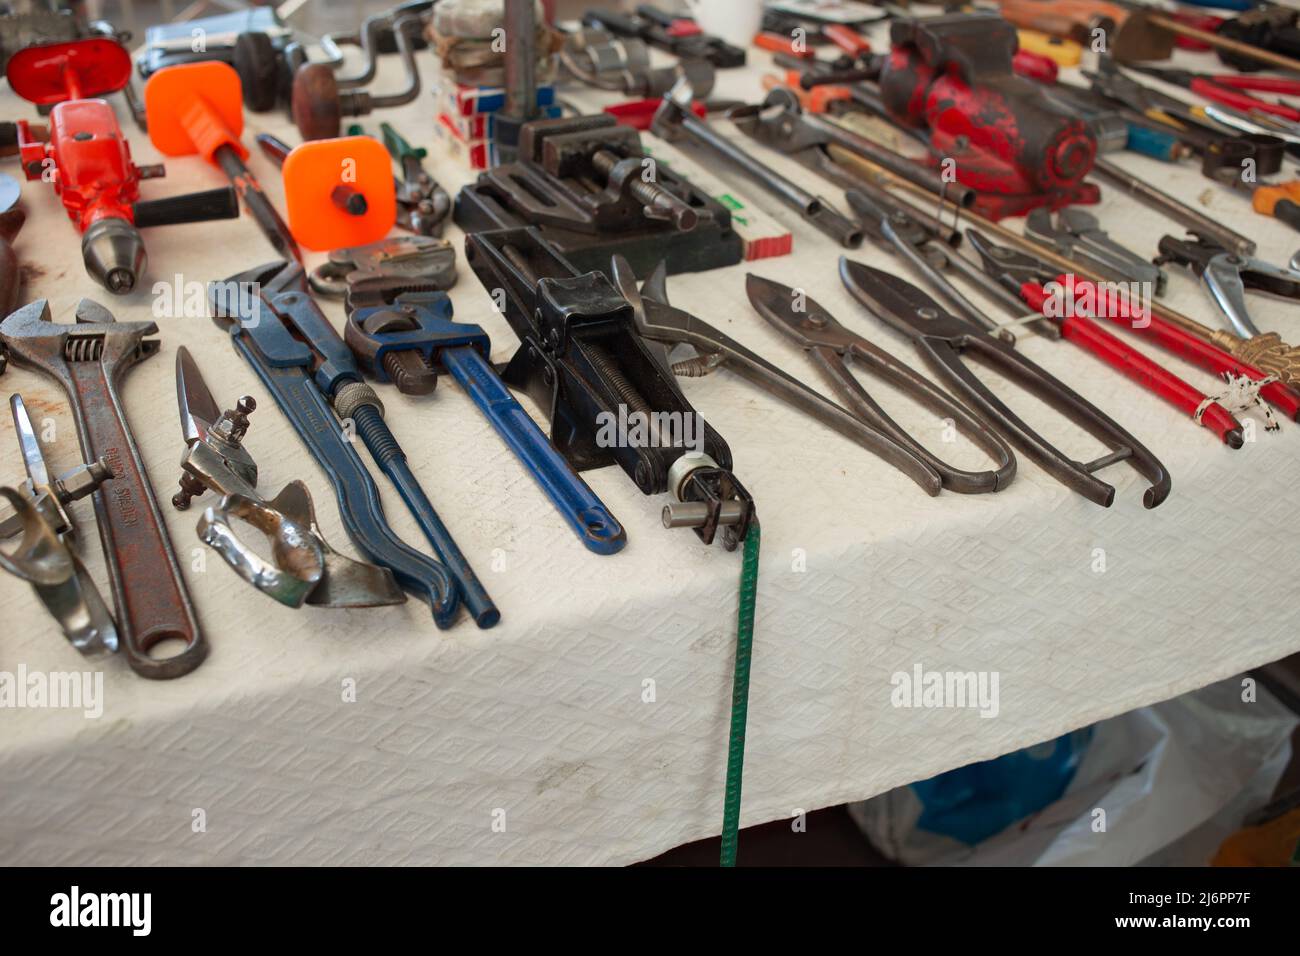 Old metal tools wrench, key, pliers at flea market in Bodrum, Turkey. Stock Photo